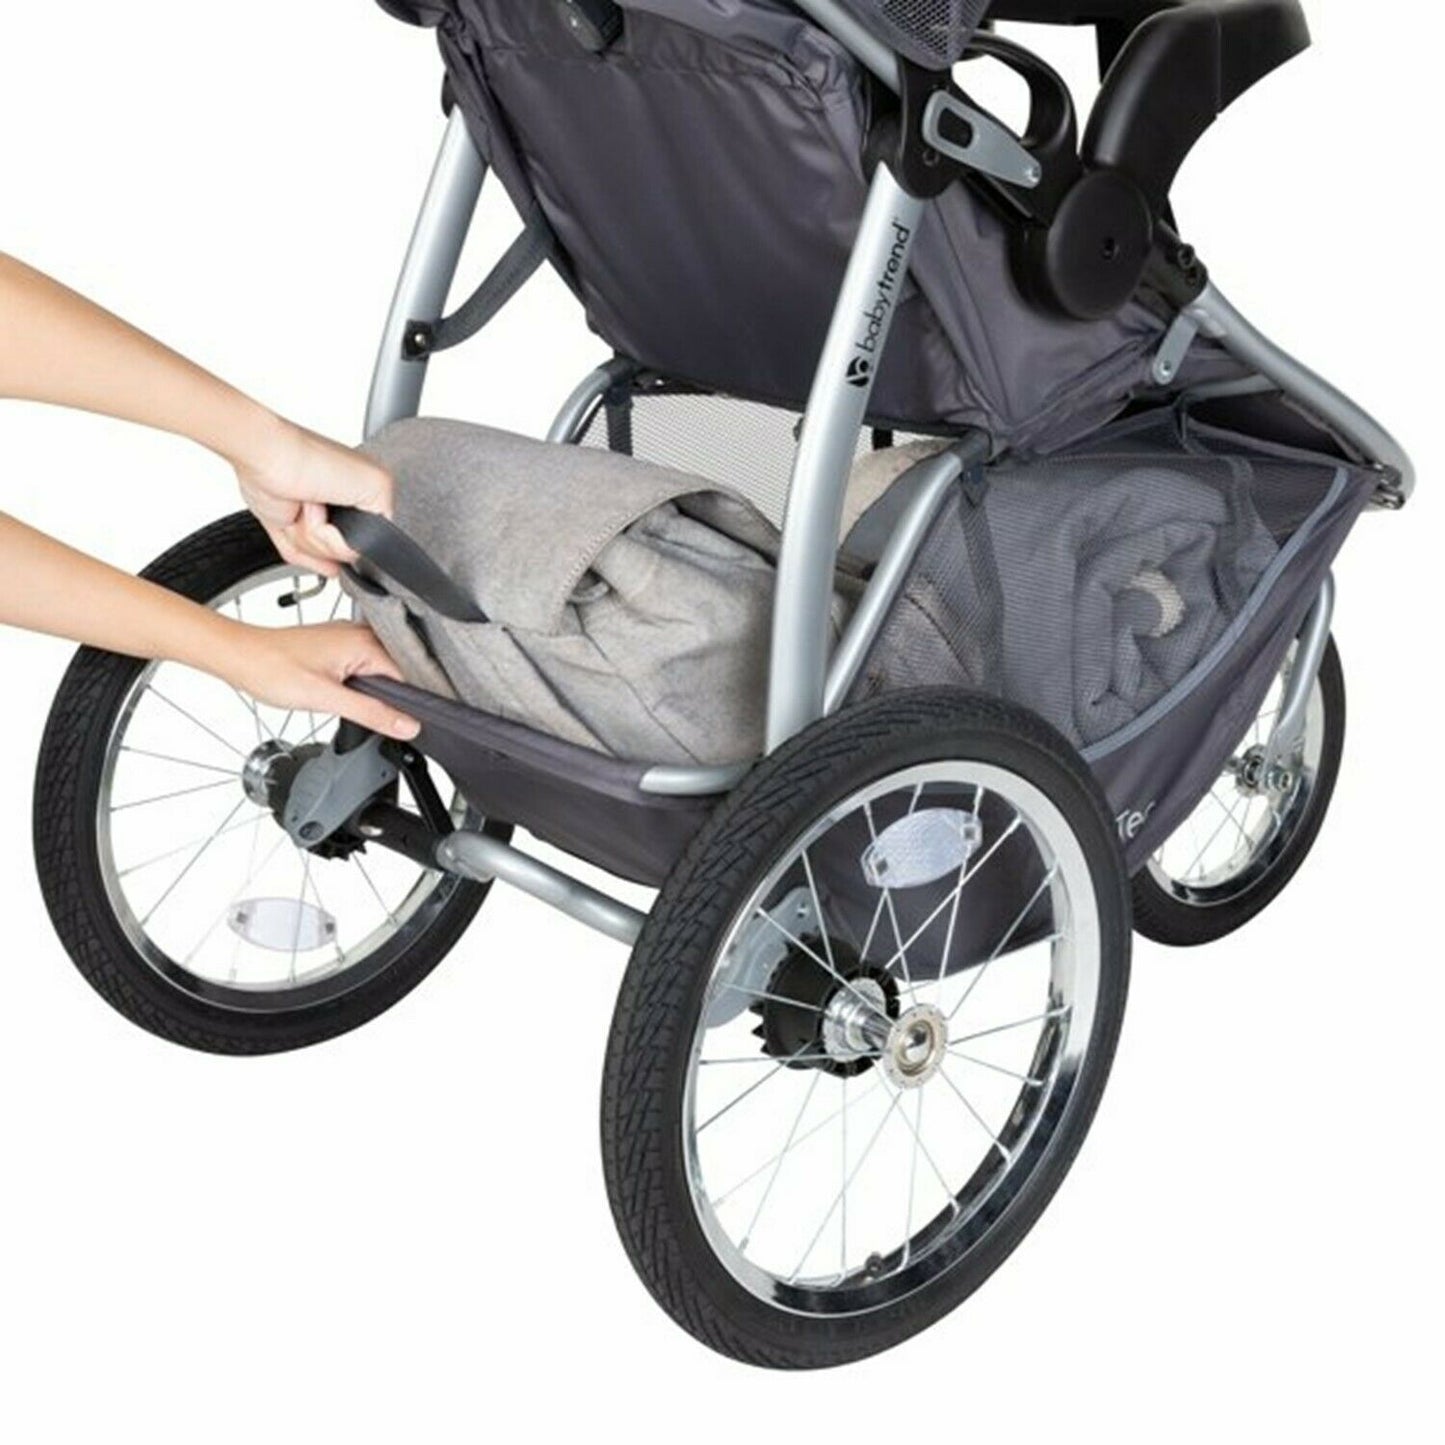 Baby Trend Stroller with Car Seat Expedition Race Tec Travel System Combo